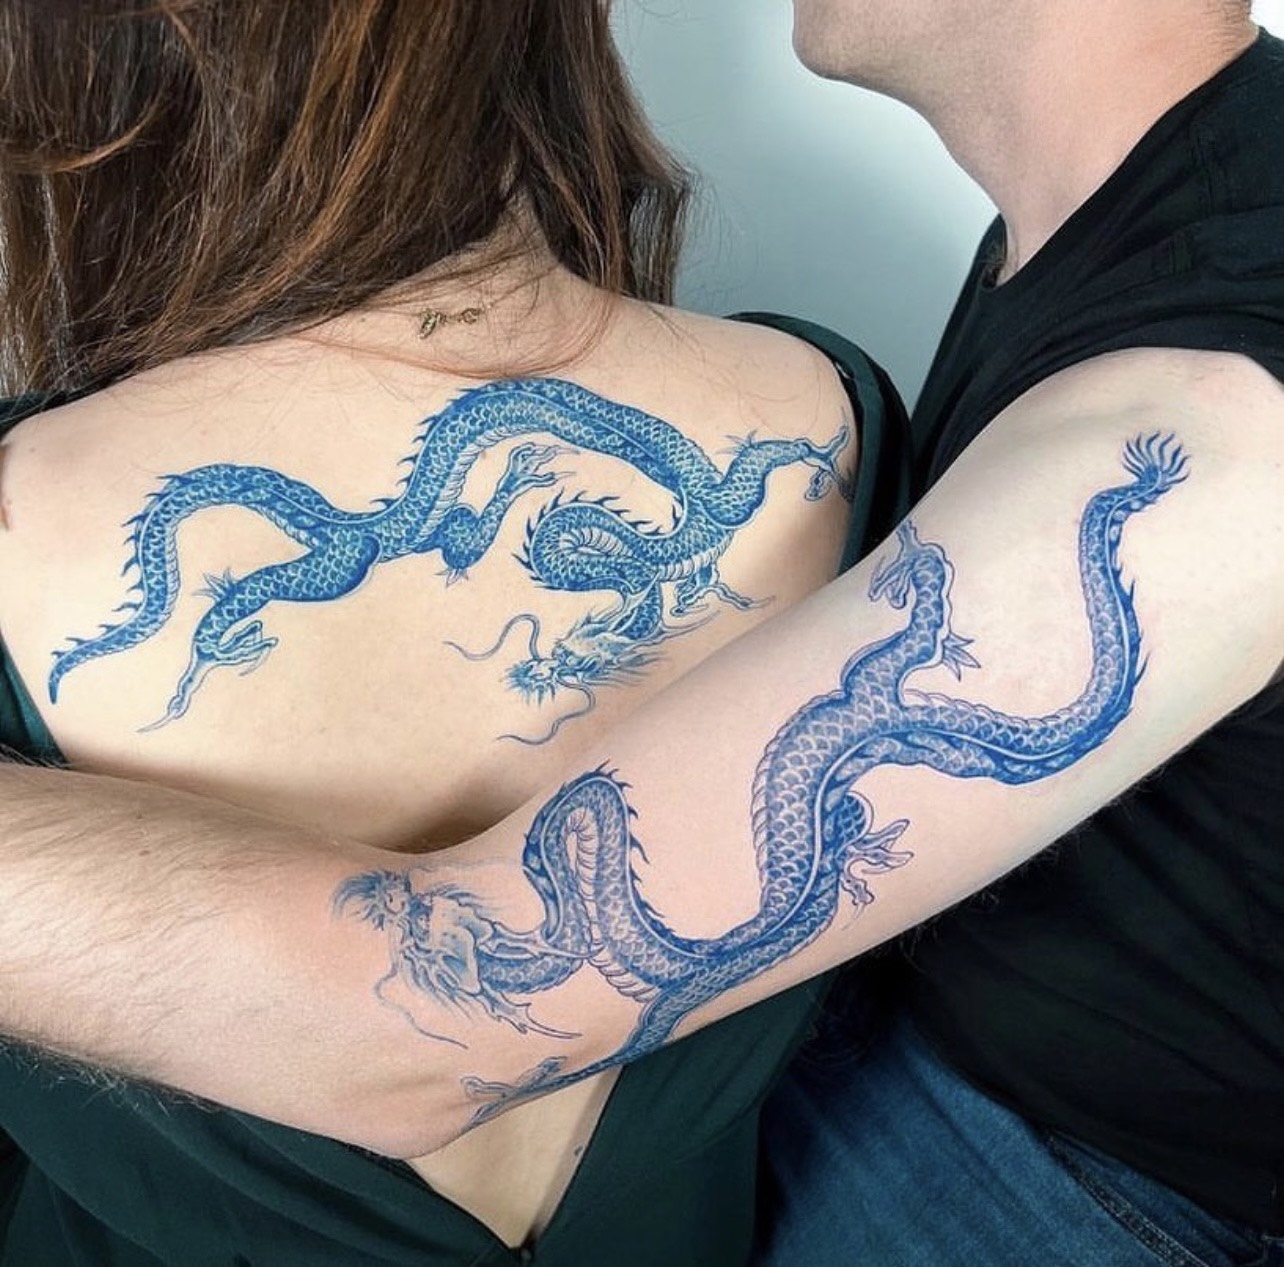 What You Should Know Before You Get A Fine-Line Tattoo